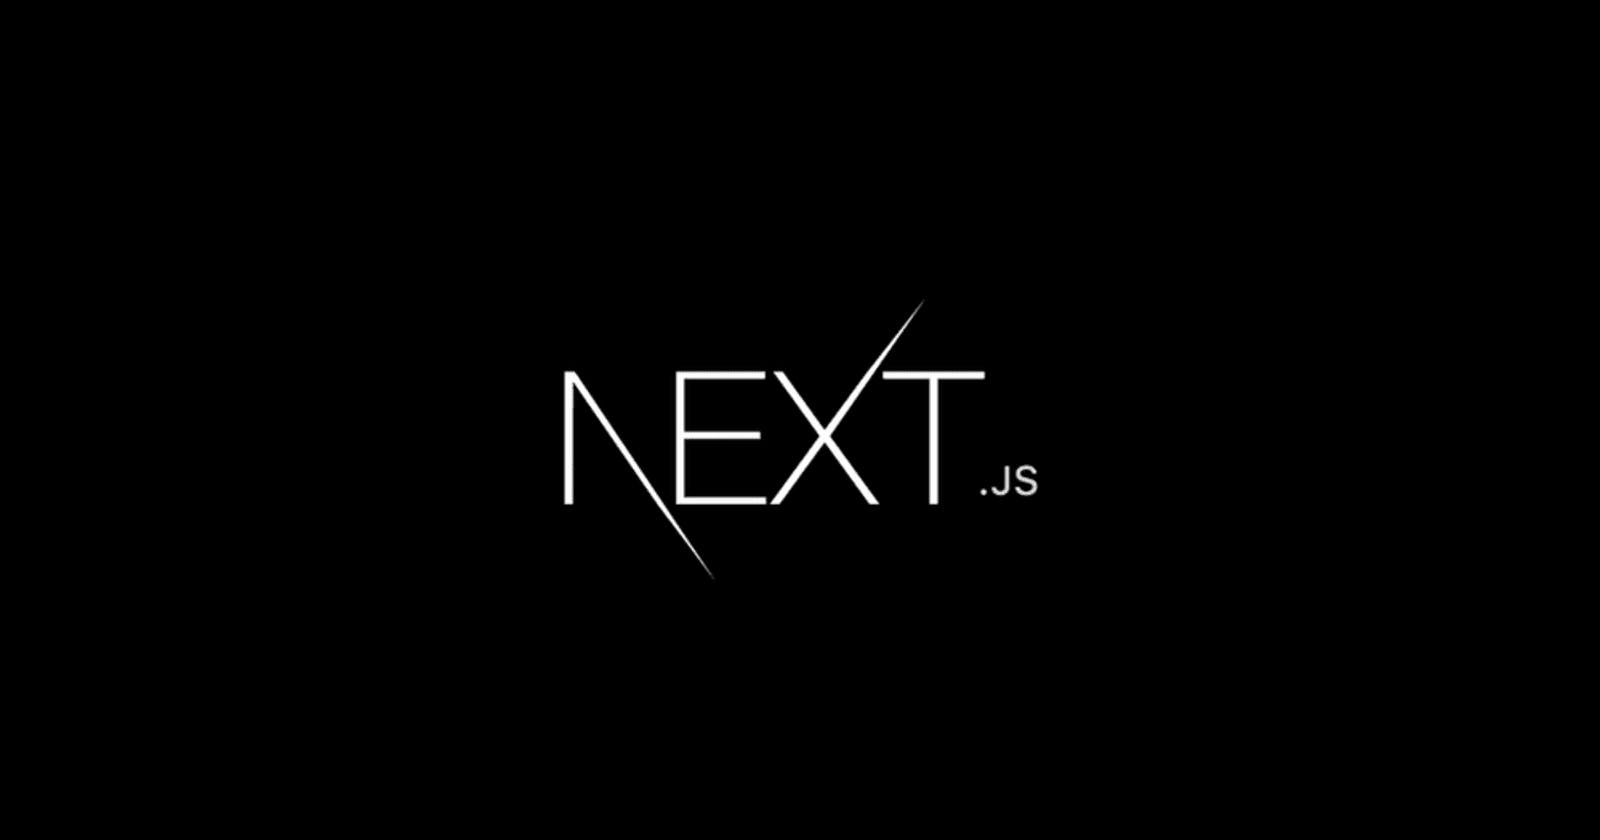 Nuances of Server Actions in Next.js